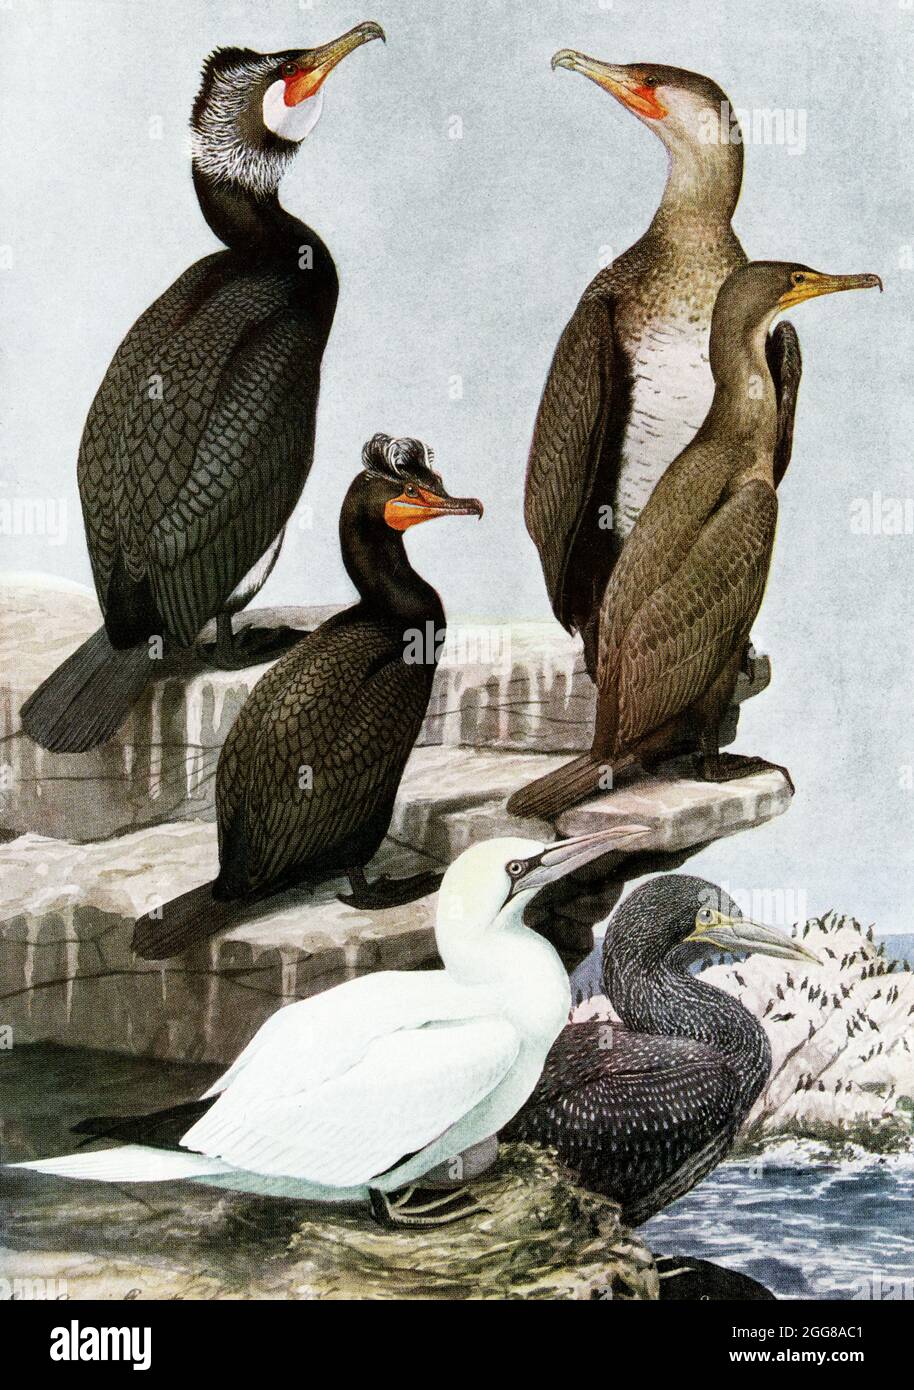 This 1917 illustration shows the following by Louis Agassiz Fuertes:  TOP: Common Commorant Phalacrocorax carbo (Linnaeus)  Left: Adult in breeding plummage. Right: Immature MIDDLE: Double-Crested Cormorant Phalacrocorax auritus auritus (Lesson) Left: Adult in breeeding plummage. Right: Immature Bottom: Gannet Sula Bassana (Linnaeus)  Left: Adult, Right: Immature Louis Agassiz Fuertes (1874-1927), an American ornithologist, illustrator and artist who set the rigorous and current-day standards for ornithological art and naturalist depiction. He is considered one of the most prolific American bi Stock Photo